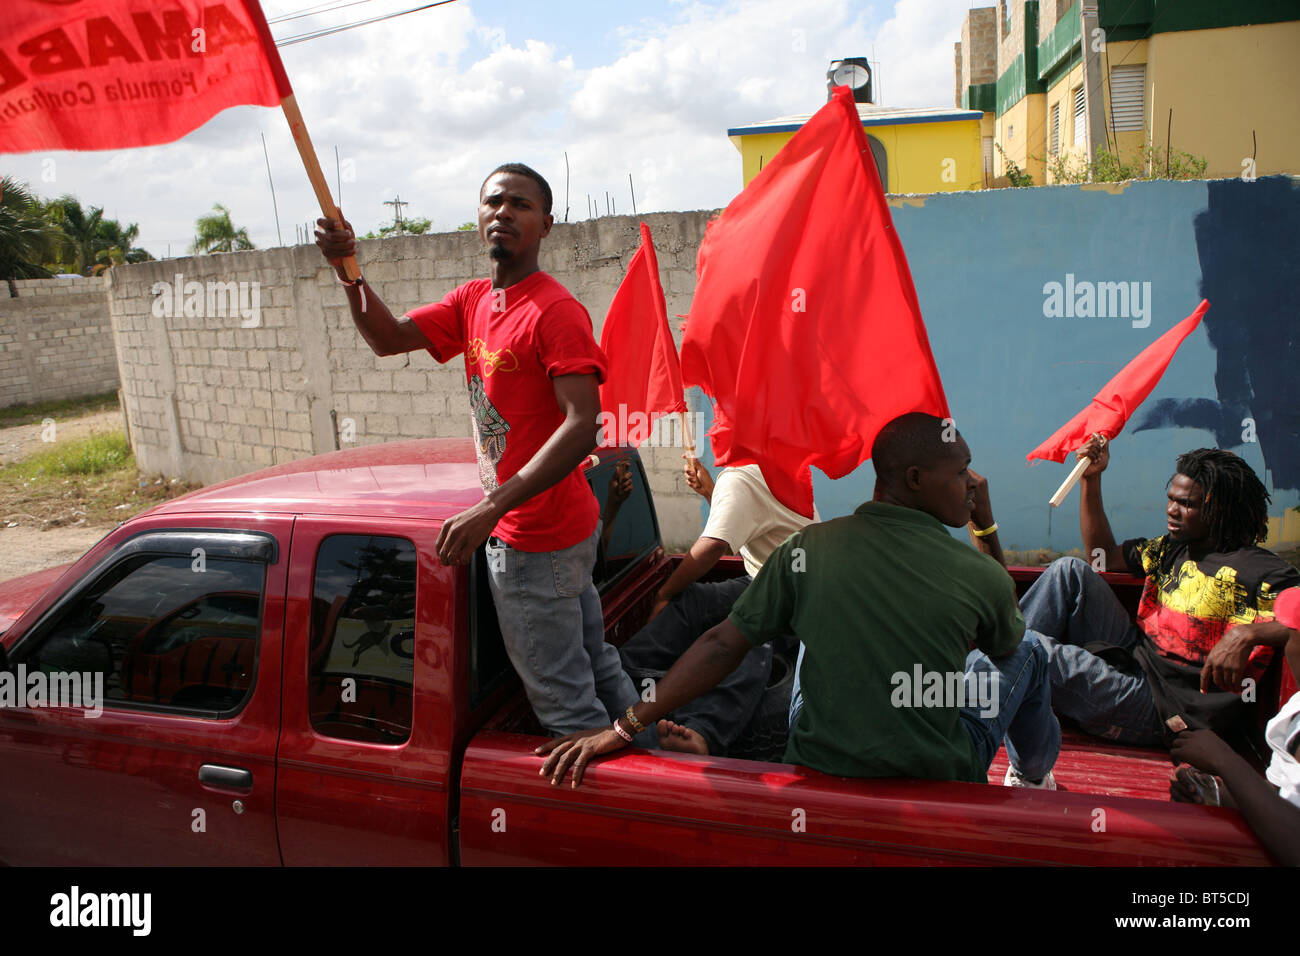 Group of young males travel in the back of a truck waving red flags on a political rally in the Dominican Republic Stock Photo